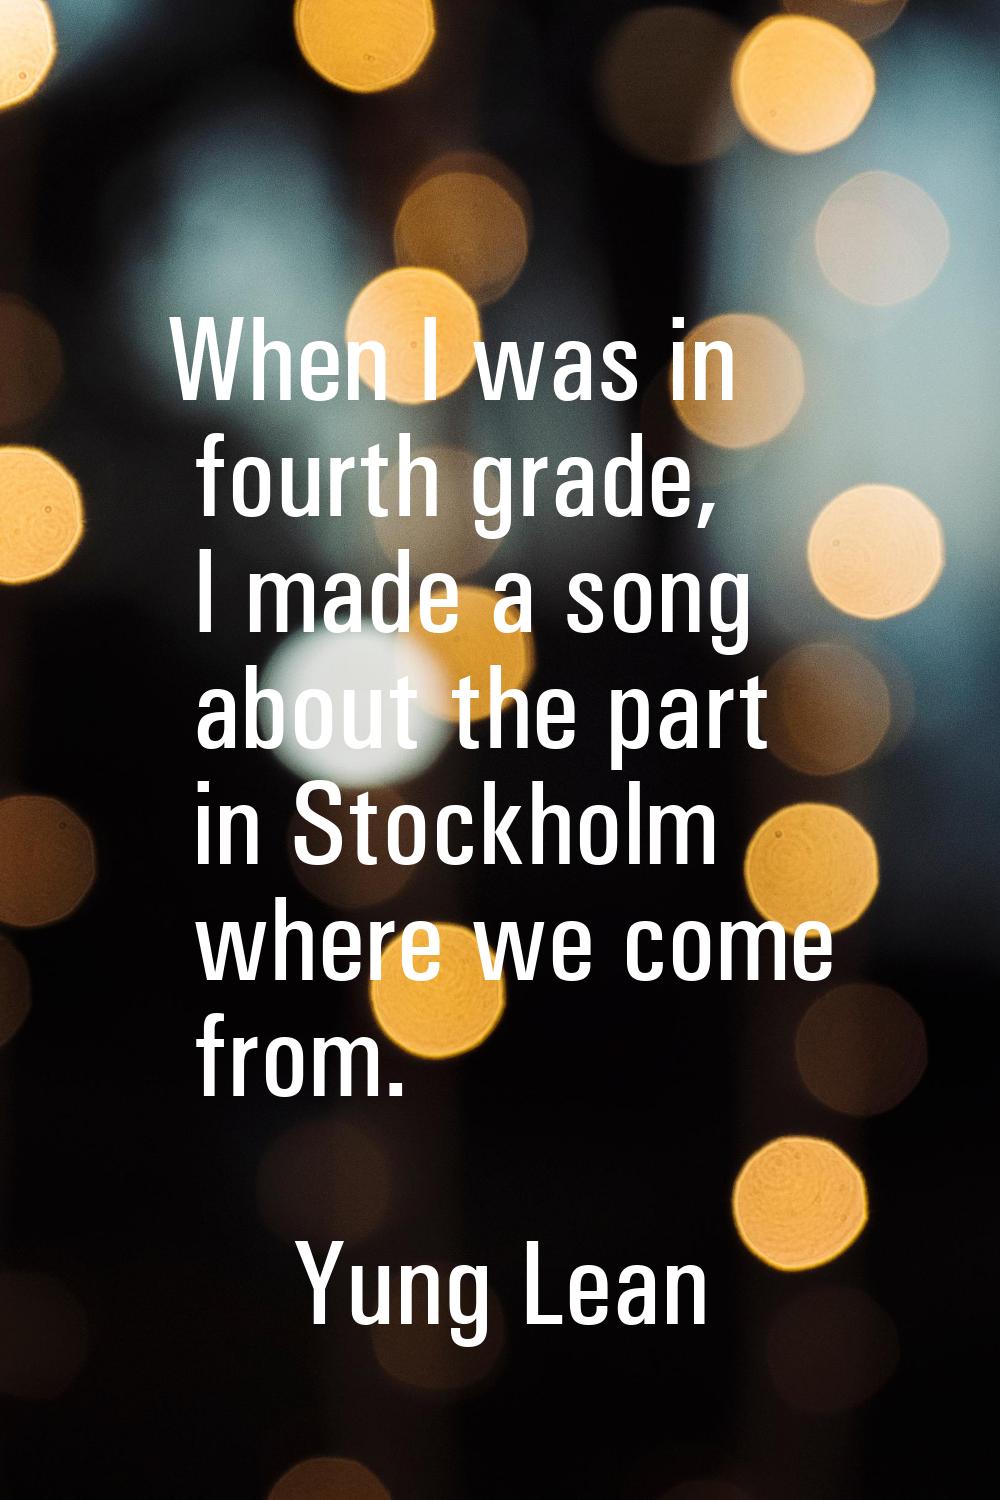 When I was in fourth grade, I made a song about the part in Stockholm where we come from.